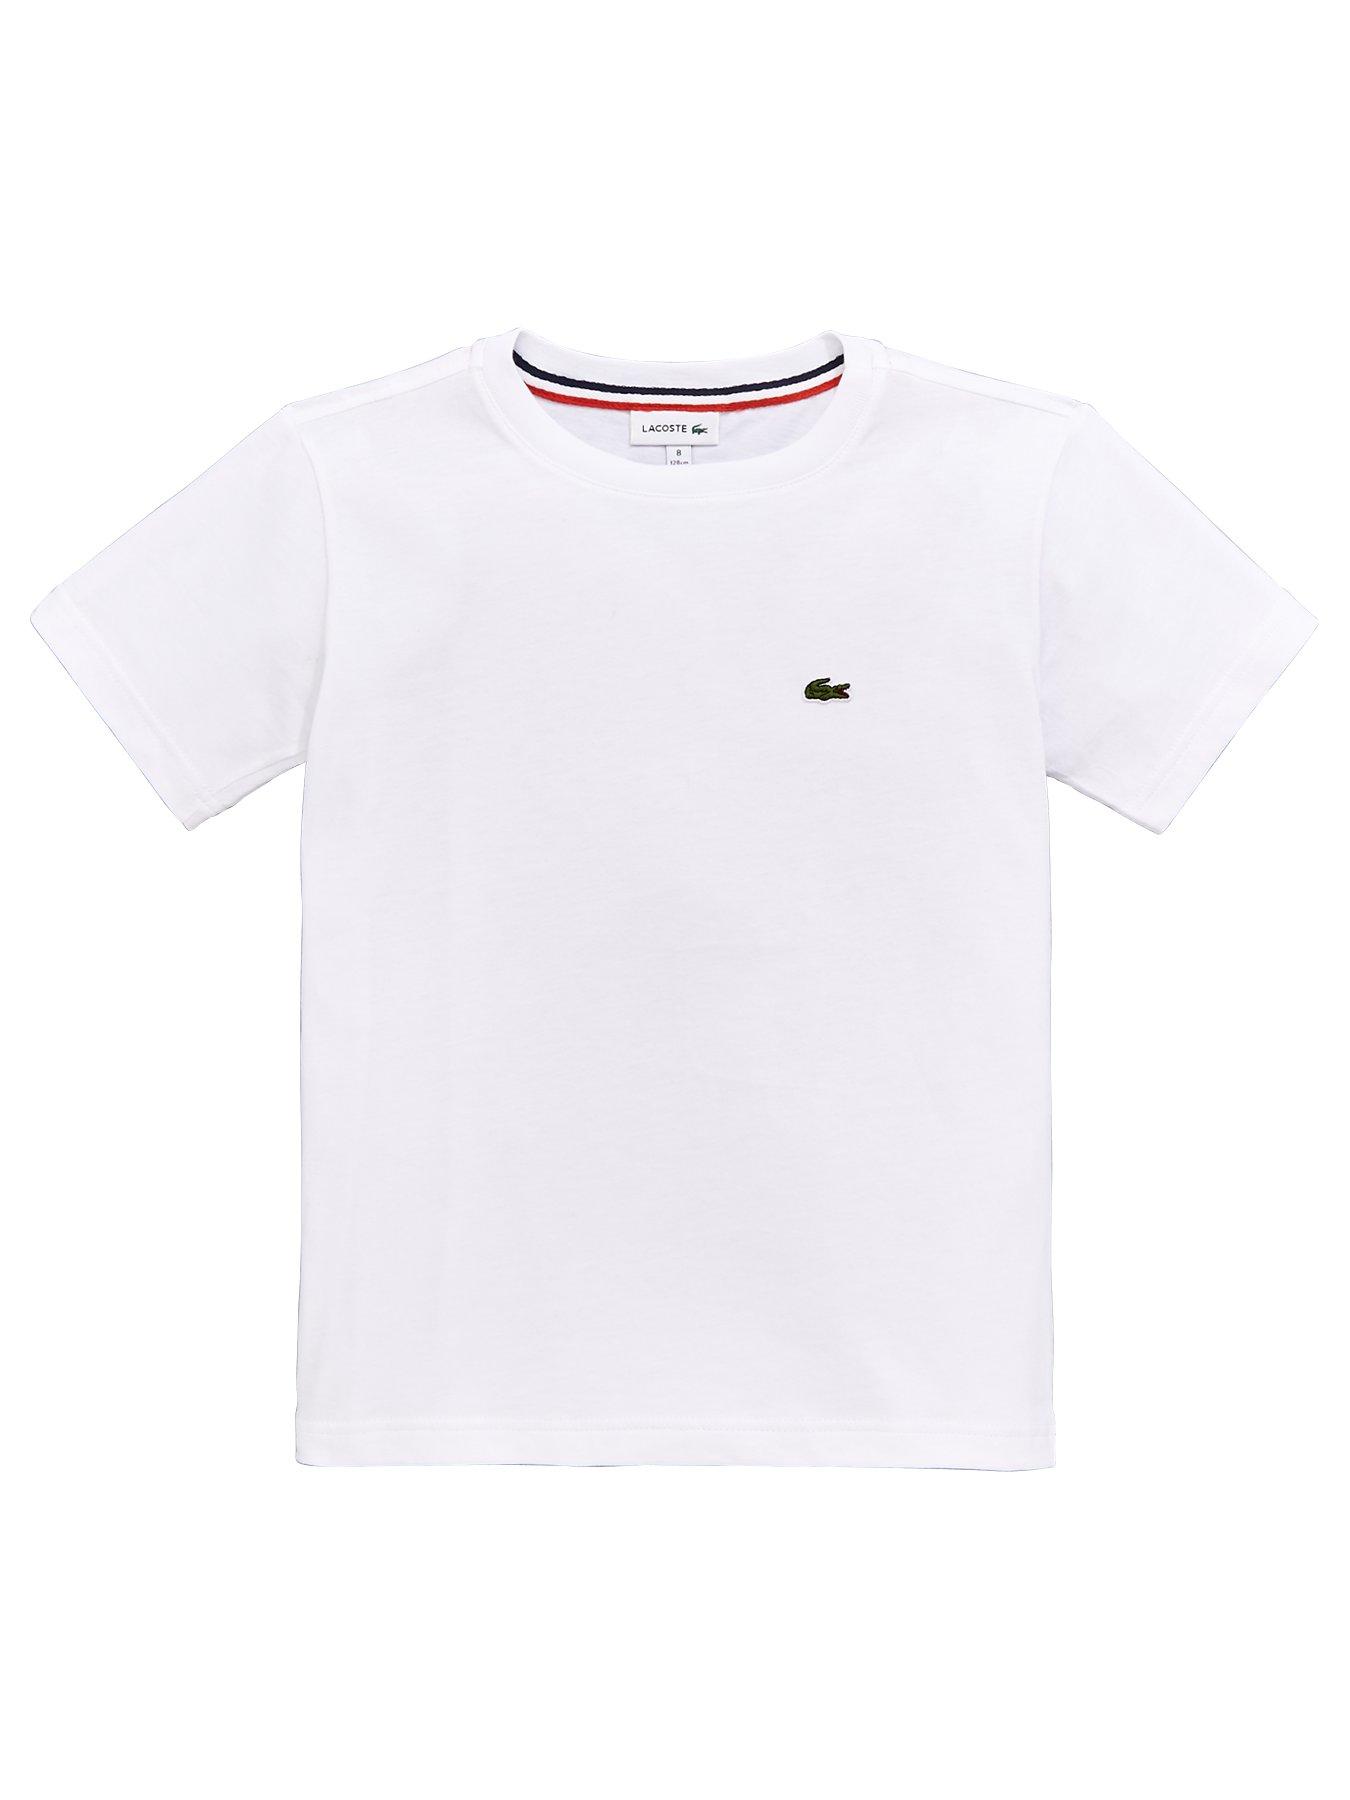 lacoste clothes off 72% - online-sms.in